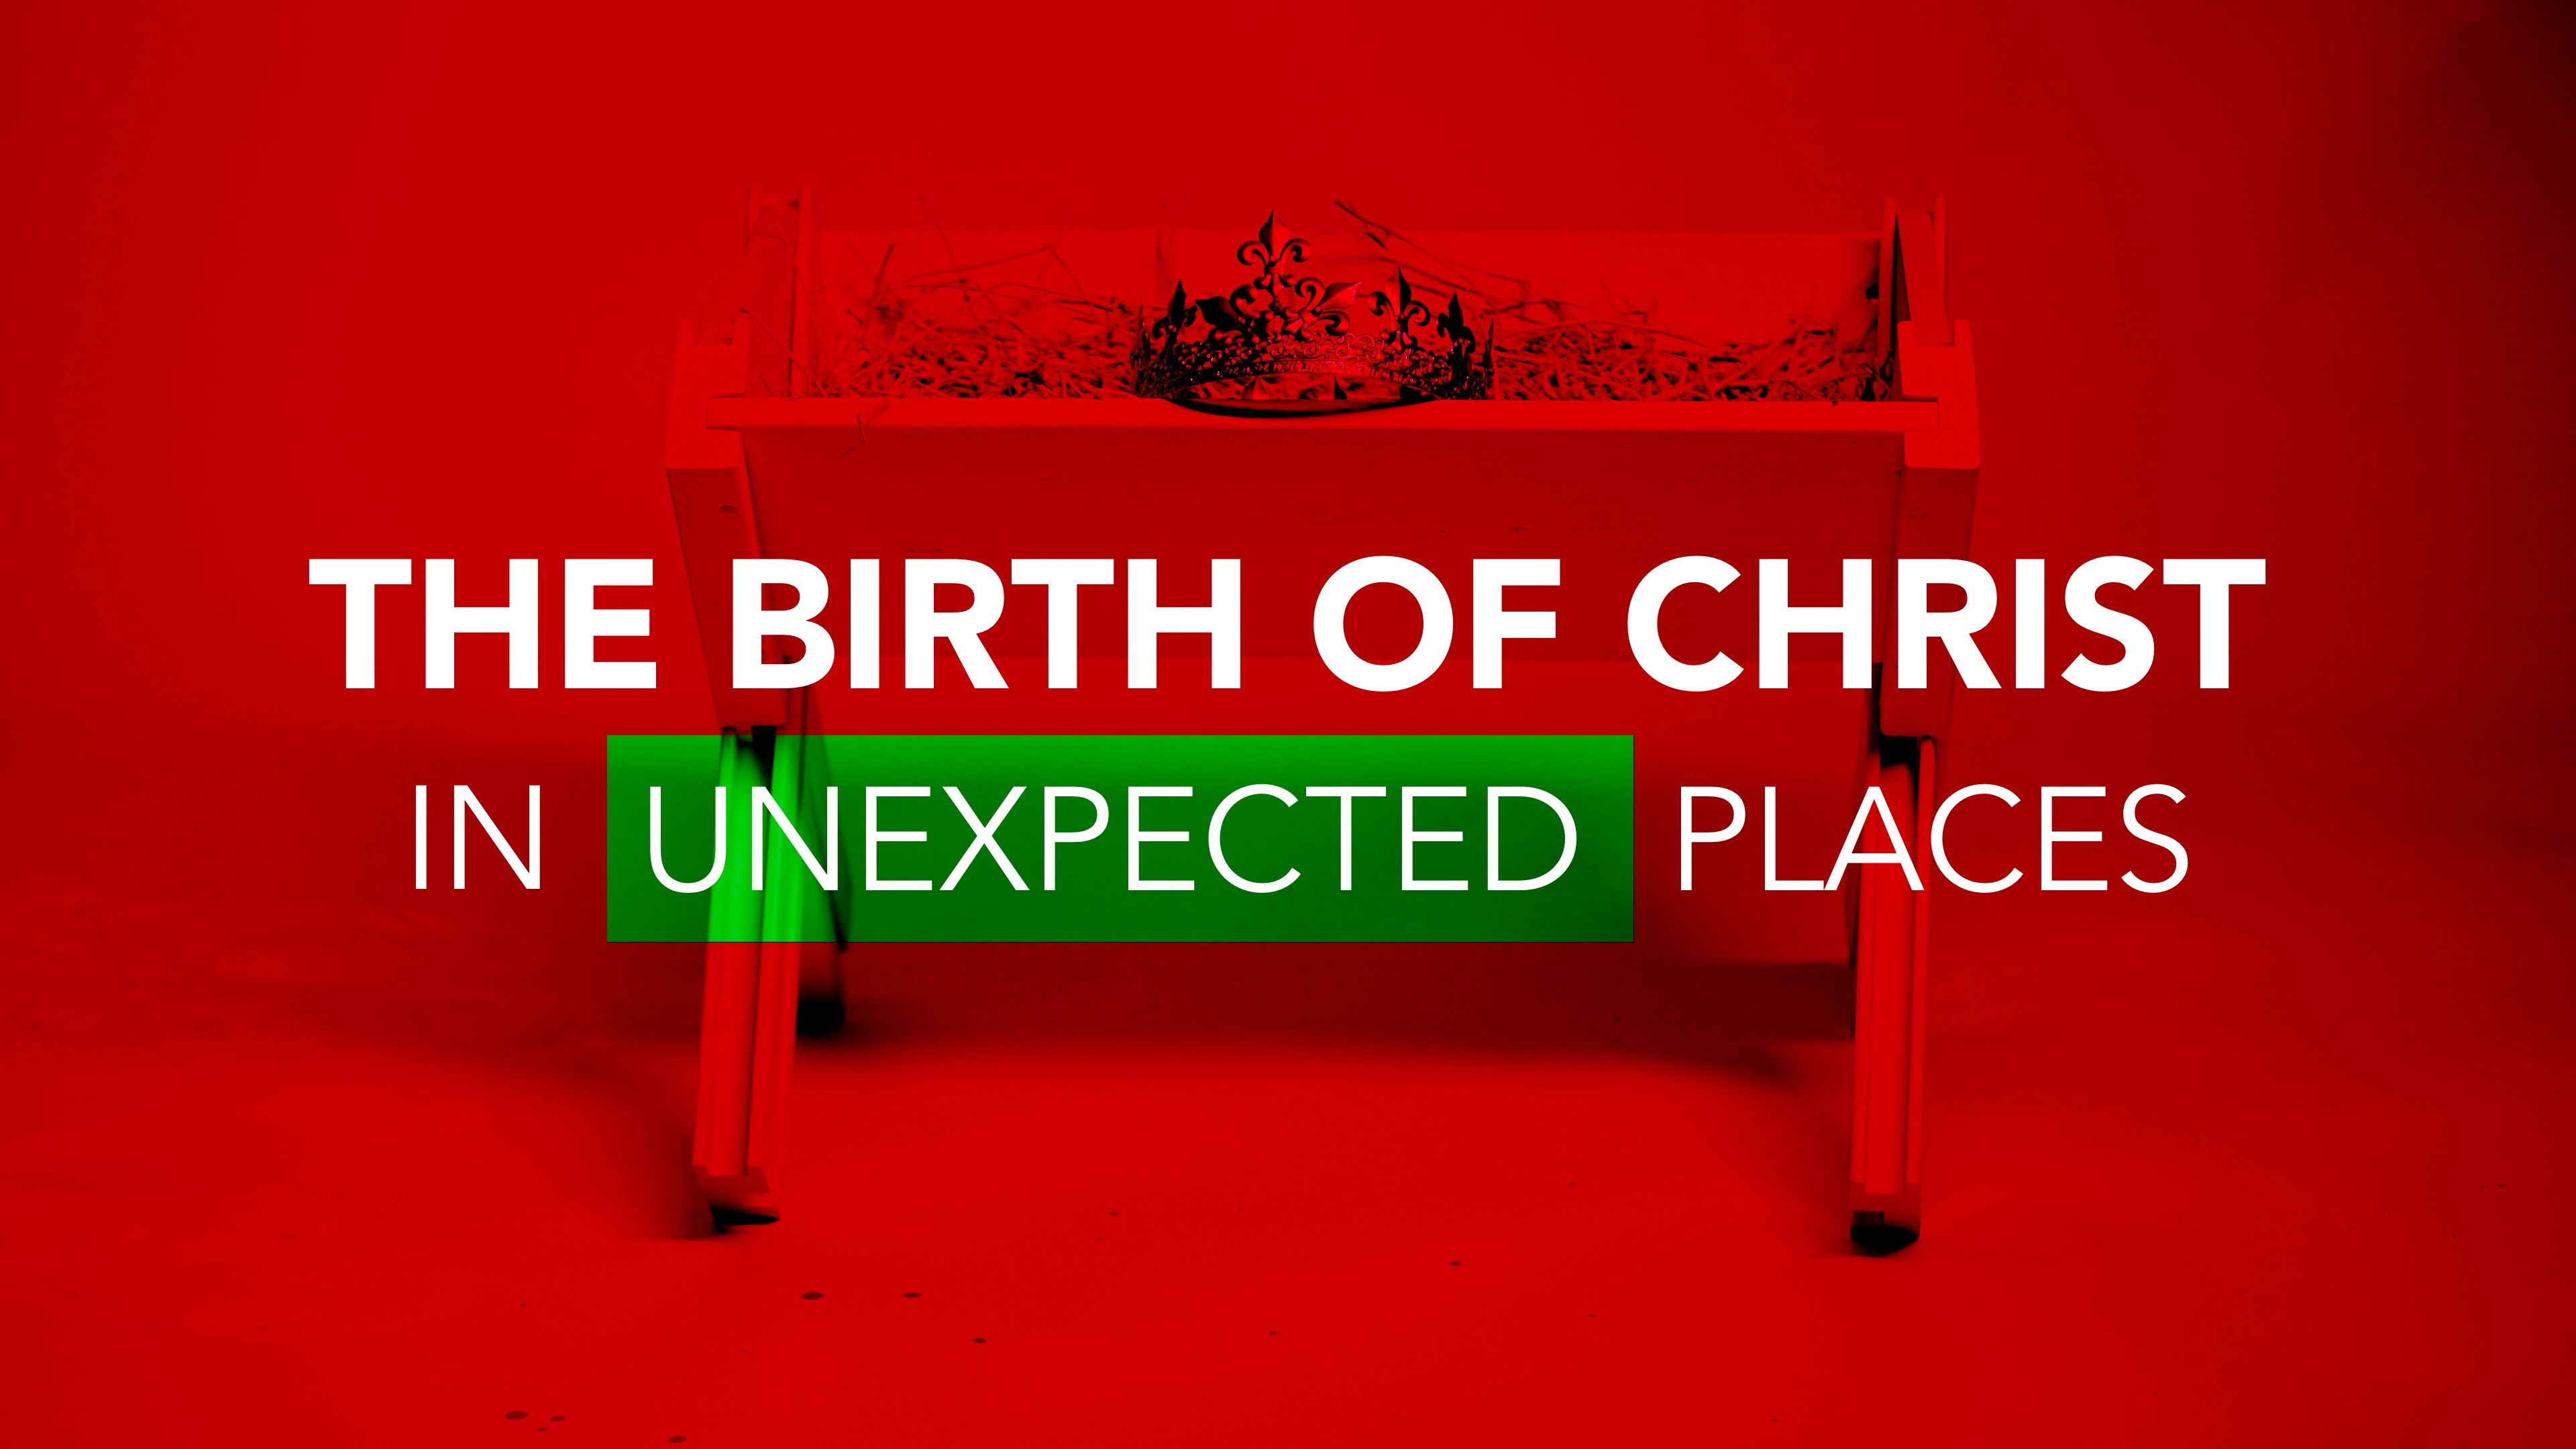 The Birth of Christ in Unexpected Places